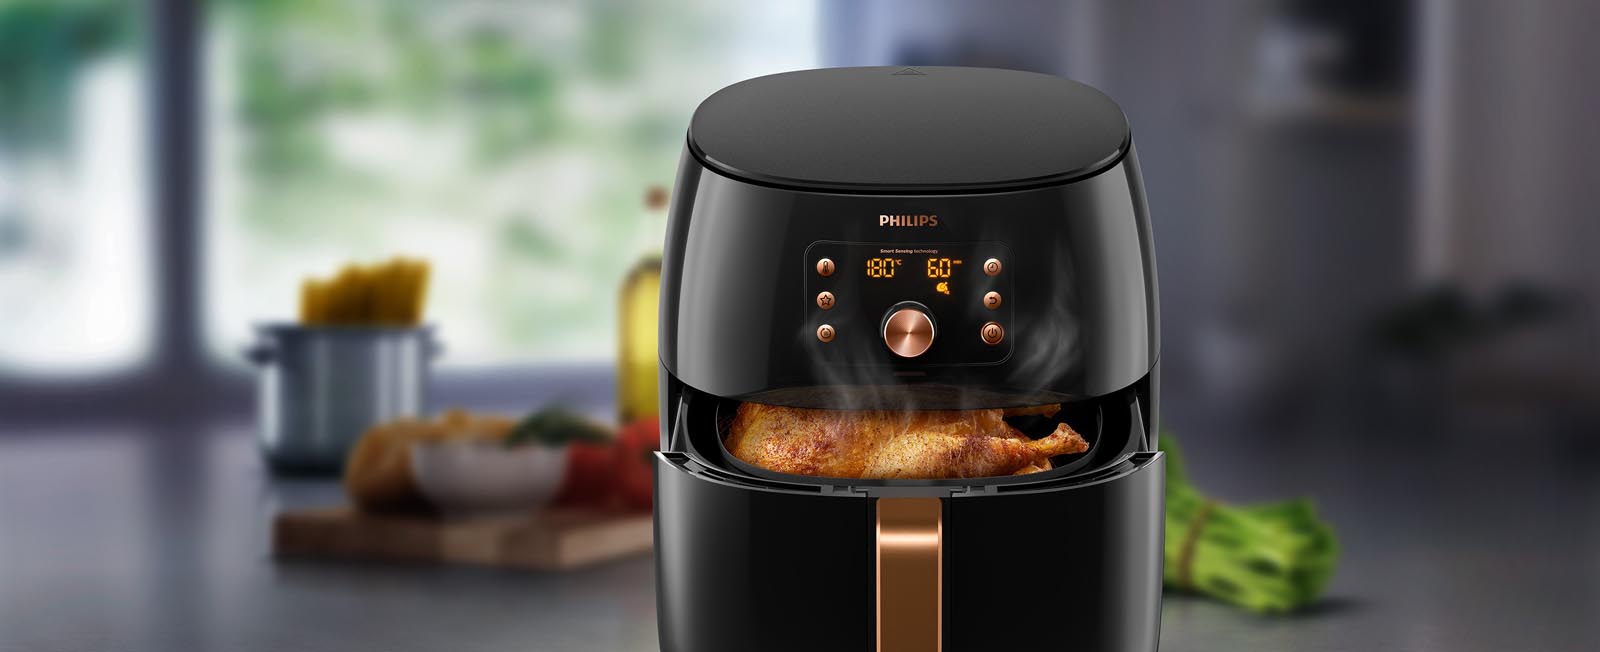 Smart XXL Airfryer Review + 10 Easy Airfryer Recipes | Harvey Norman